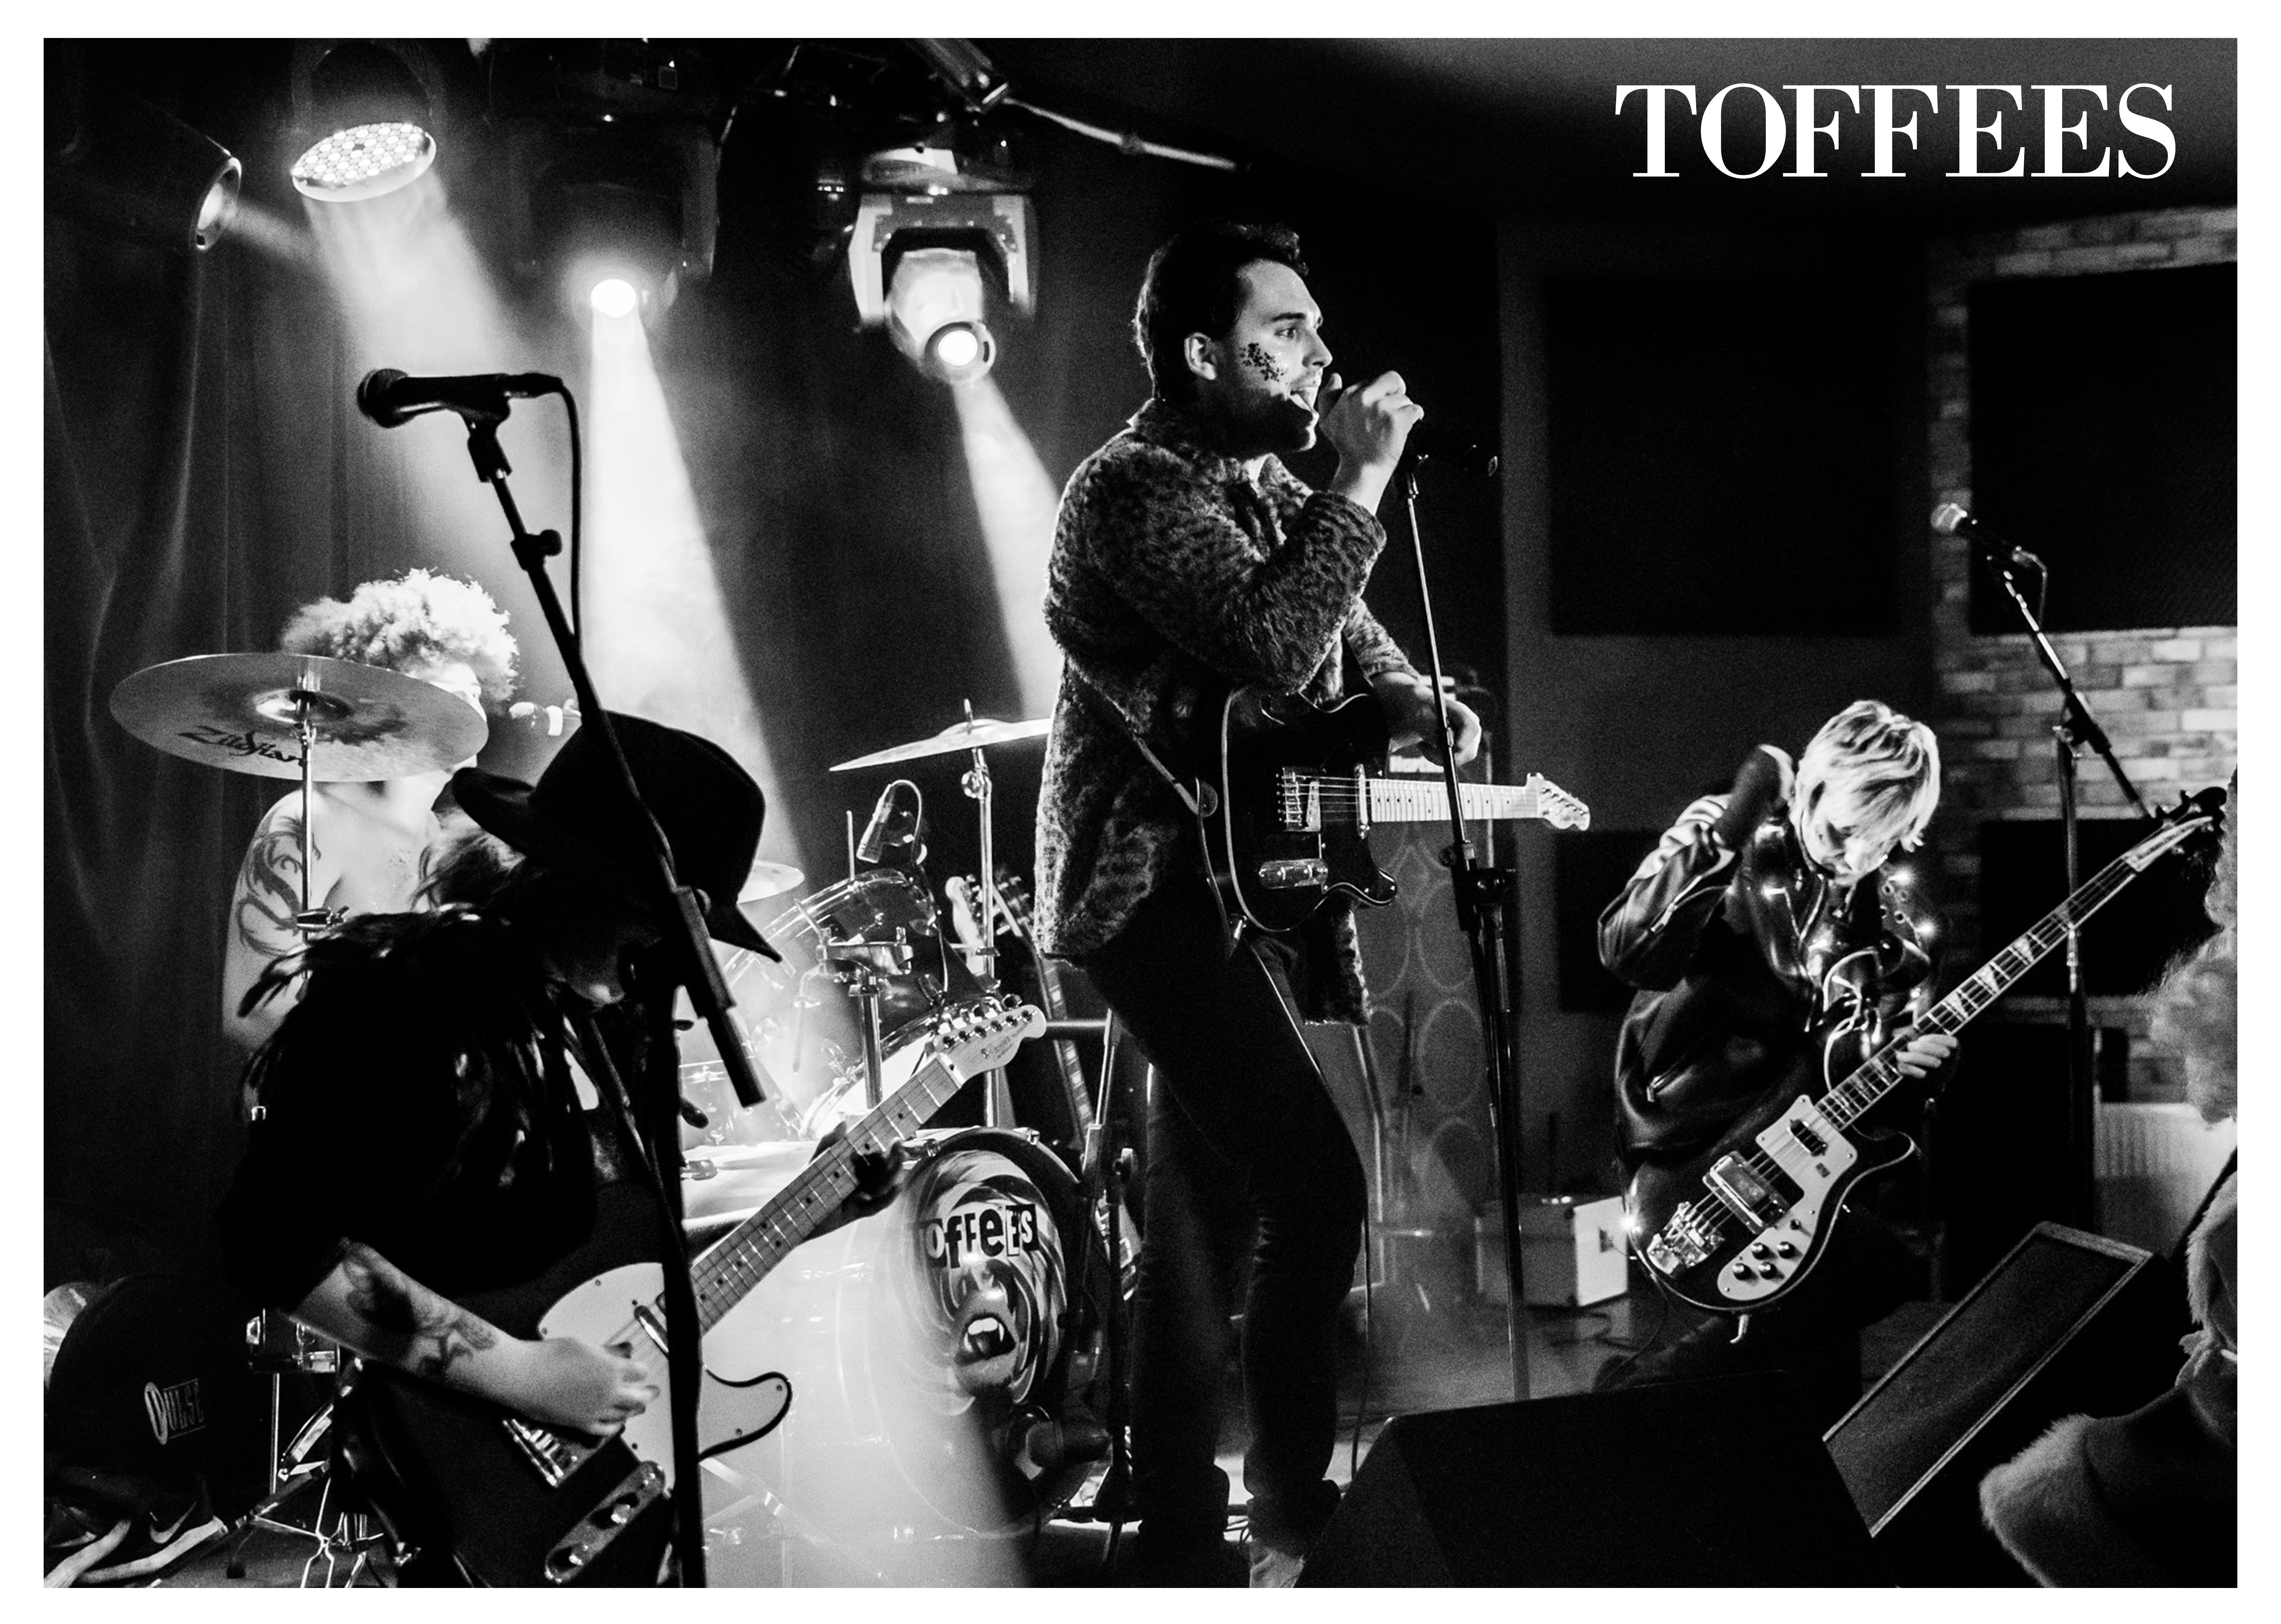 Toffees Full Band Poster - TOFFEES